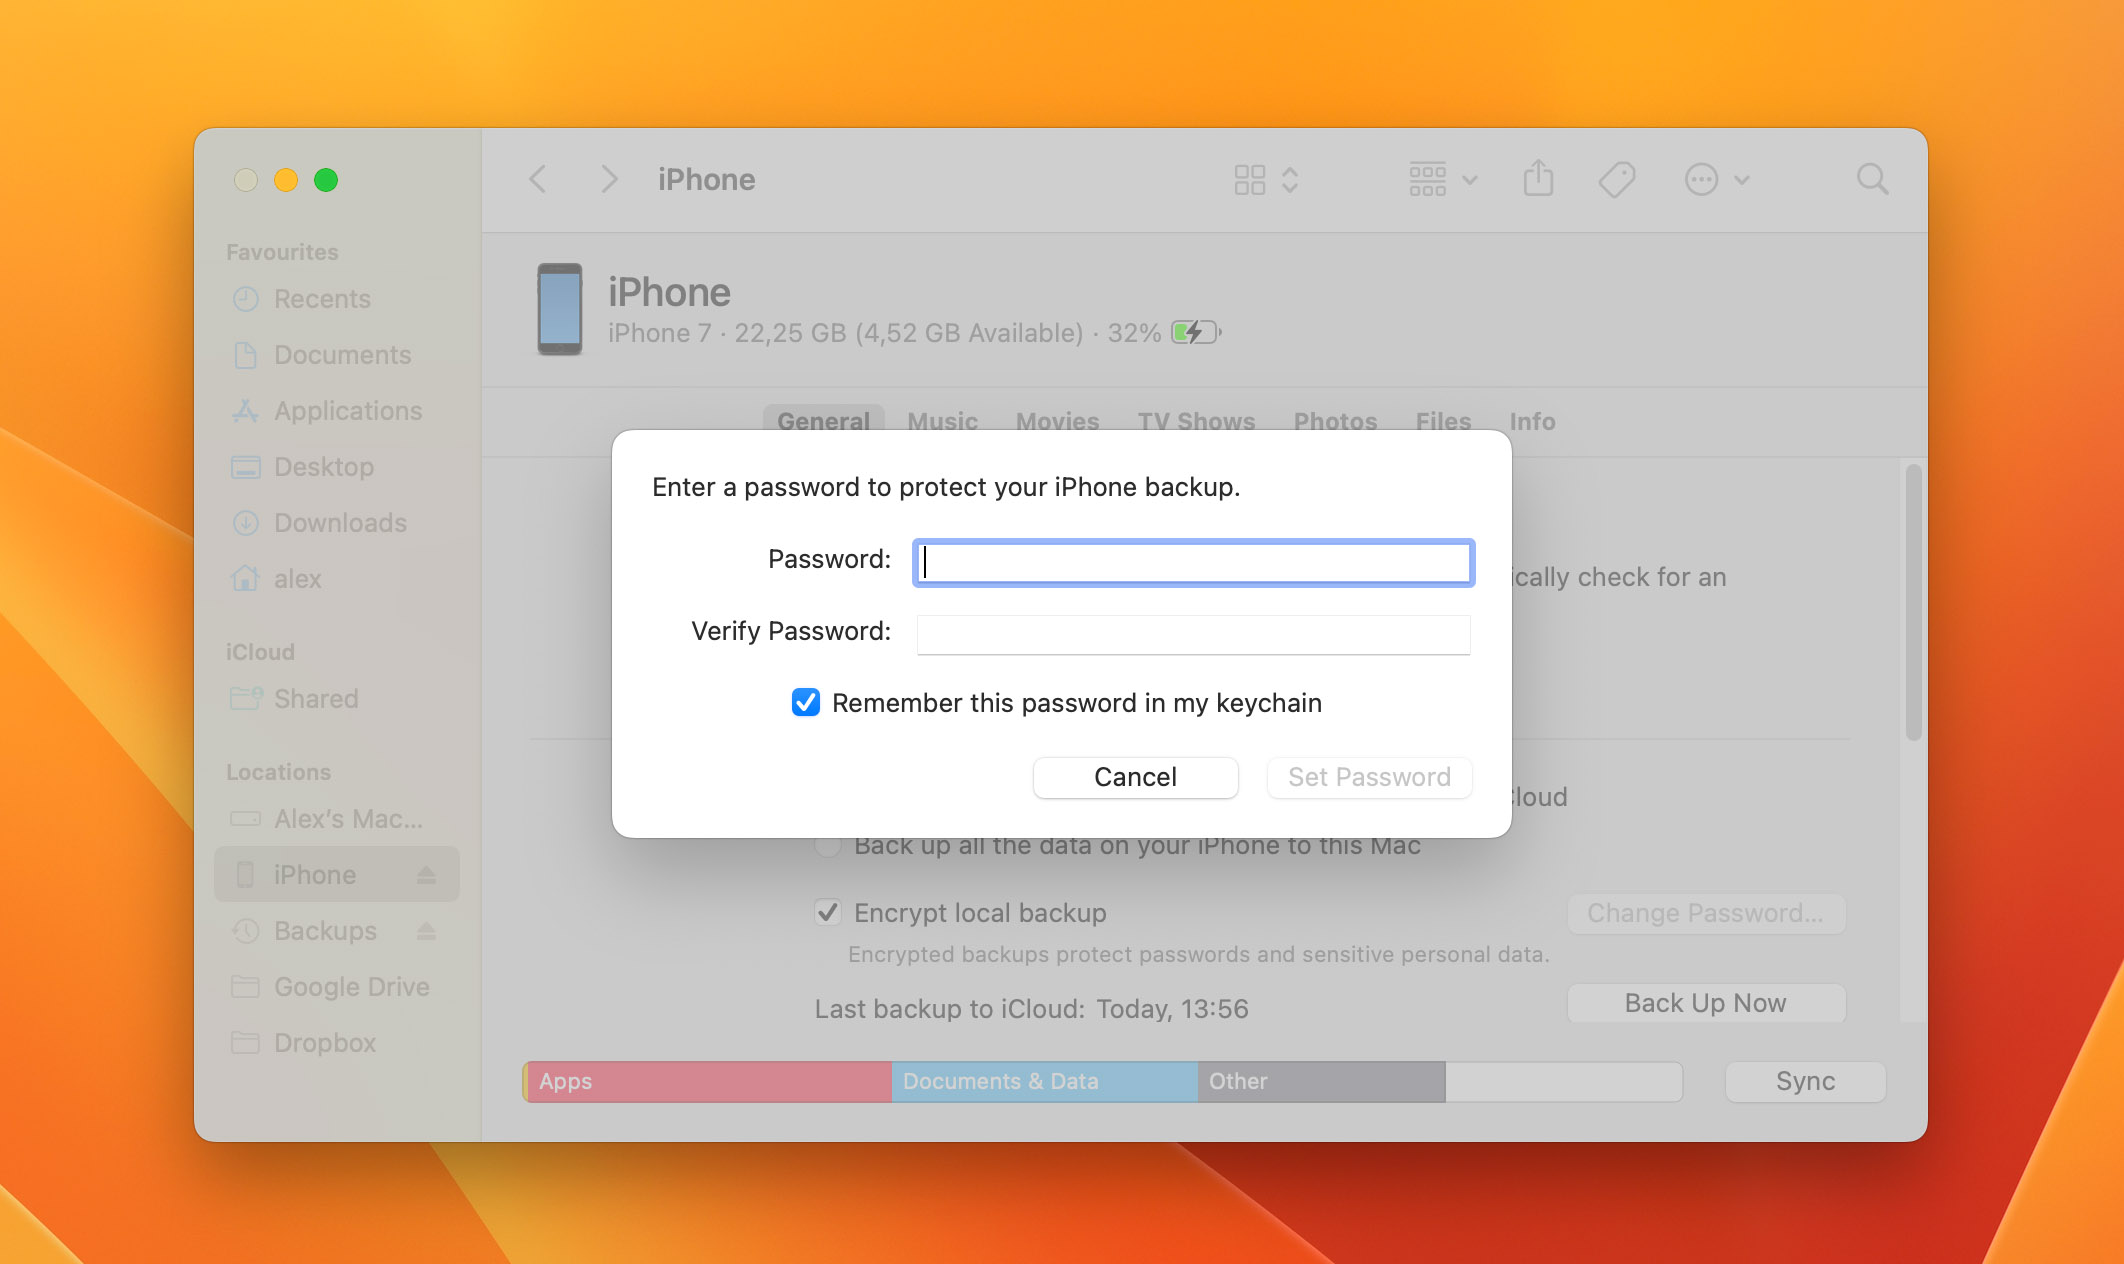 Encrypt your local iPhone backups